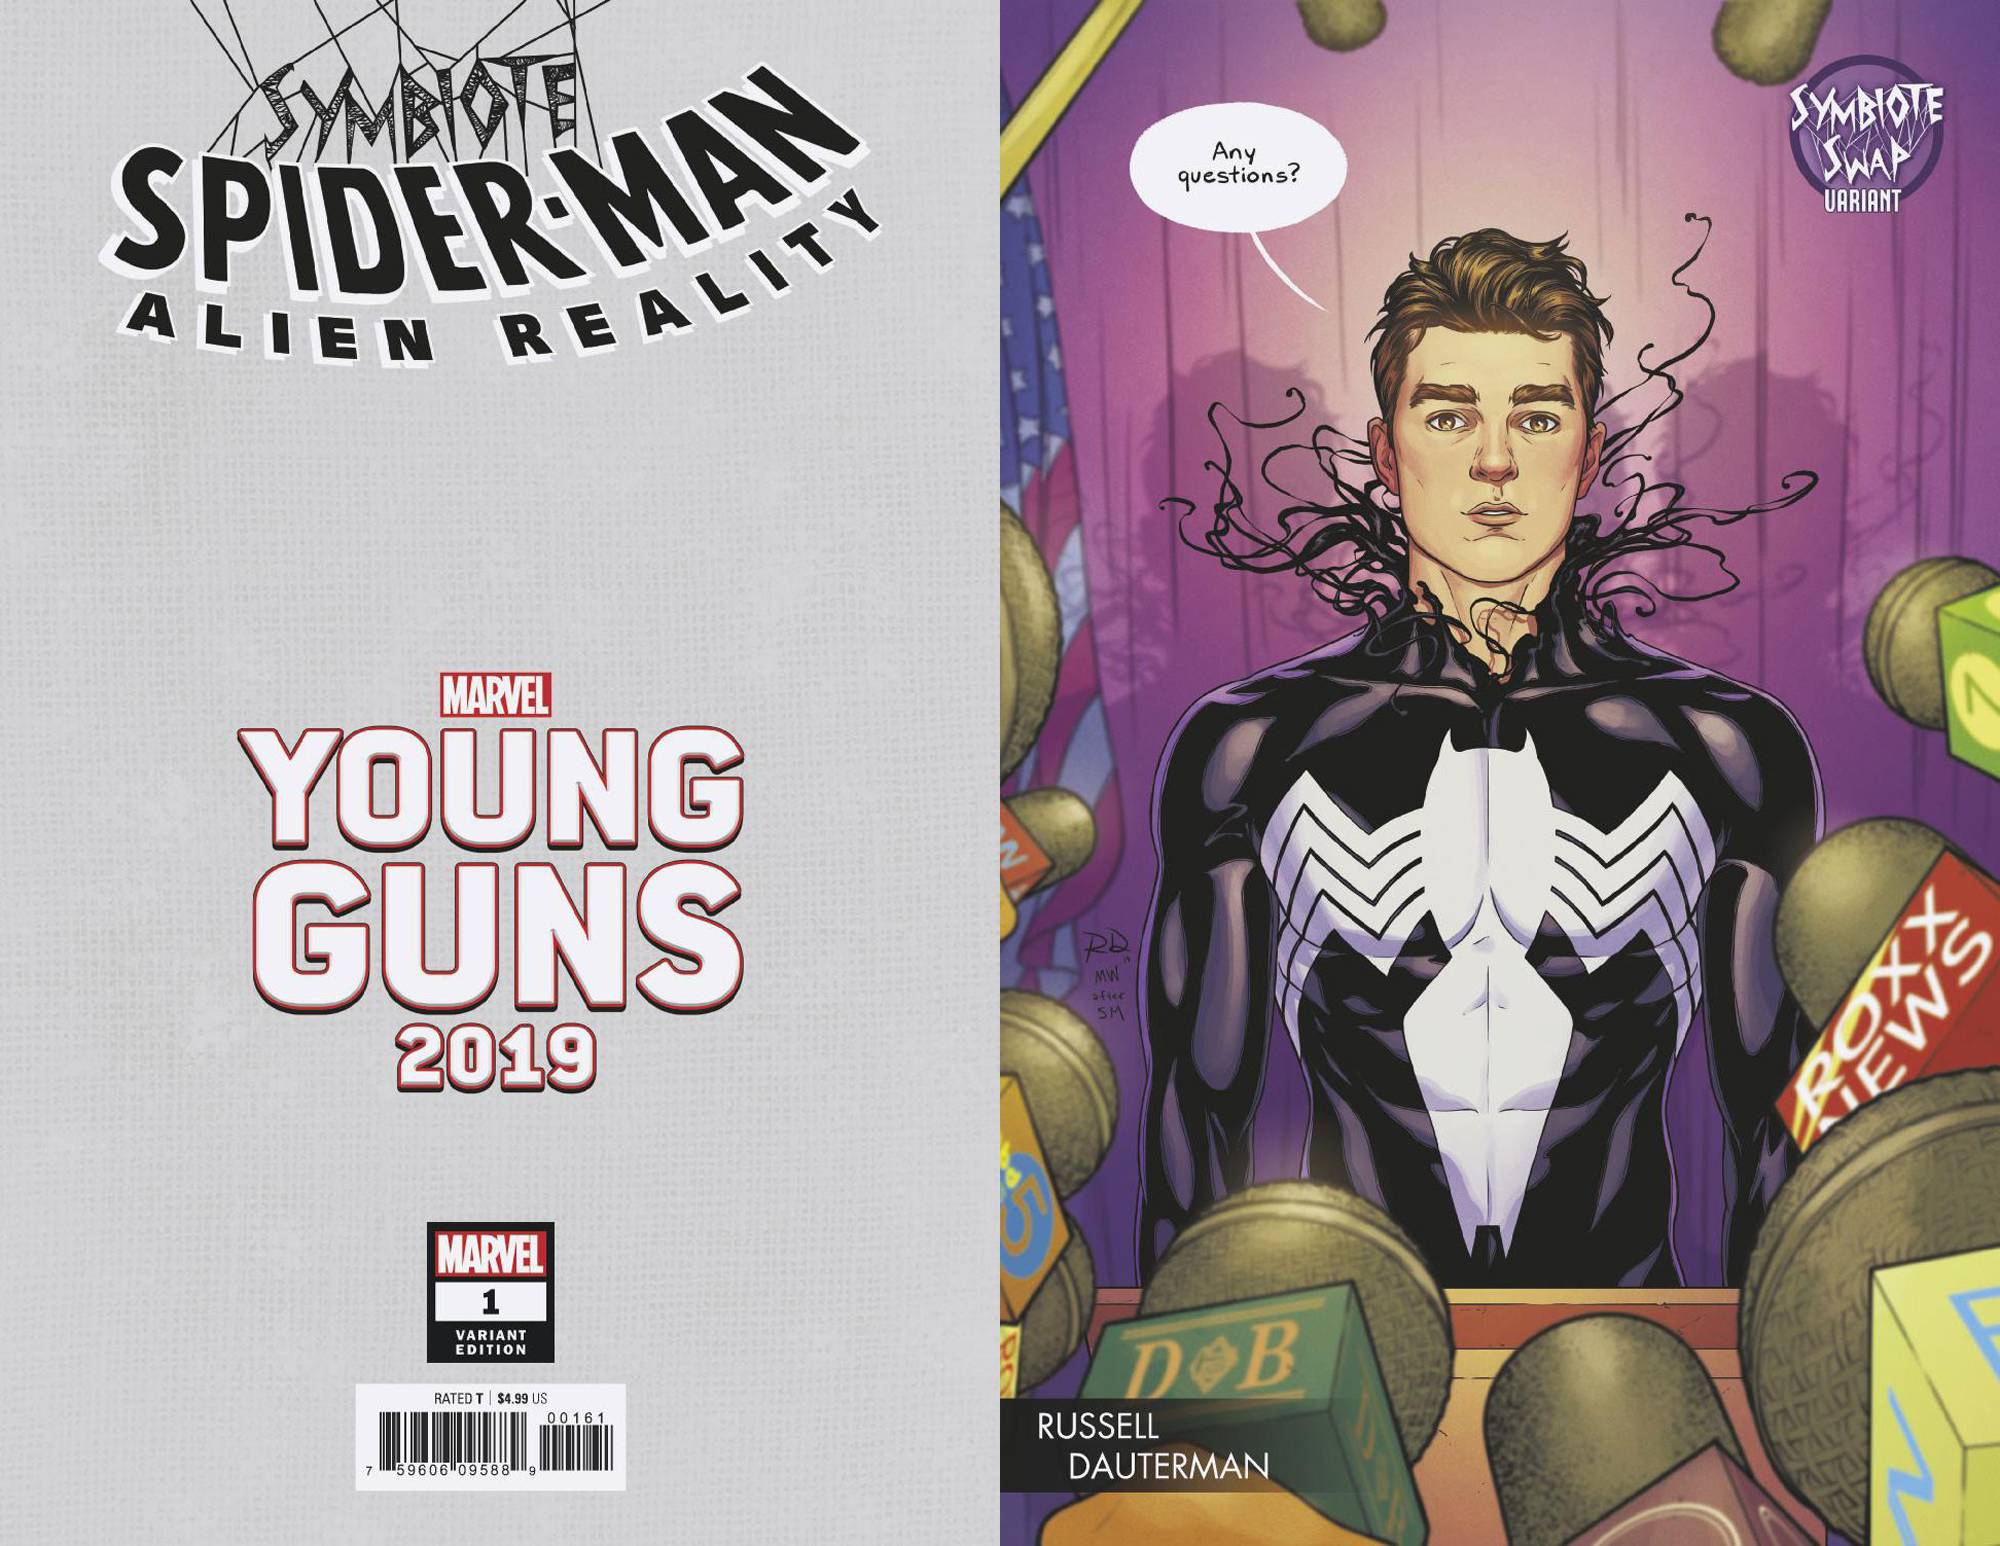 Symbiote Spider-Man Alien Reality #1 Dauterman Young Guns Variant (Of 5)